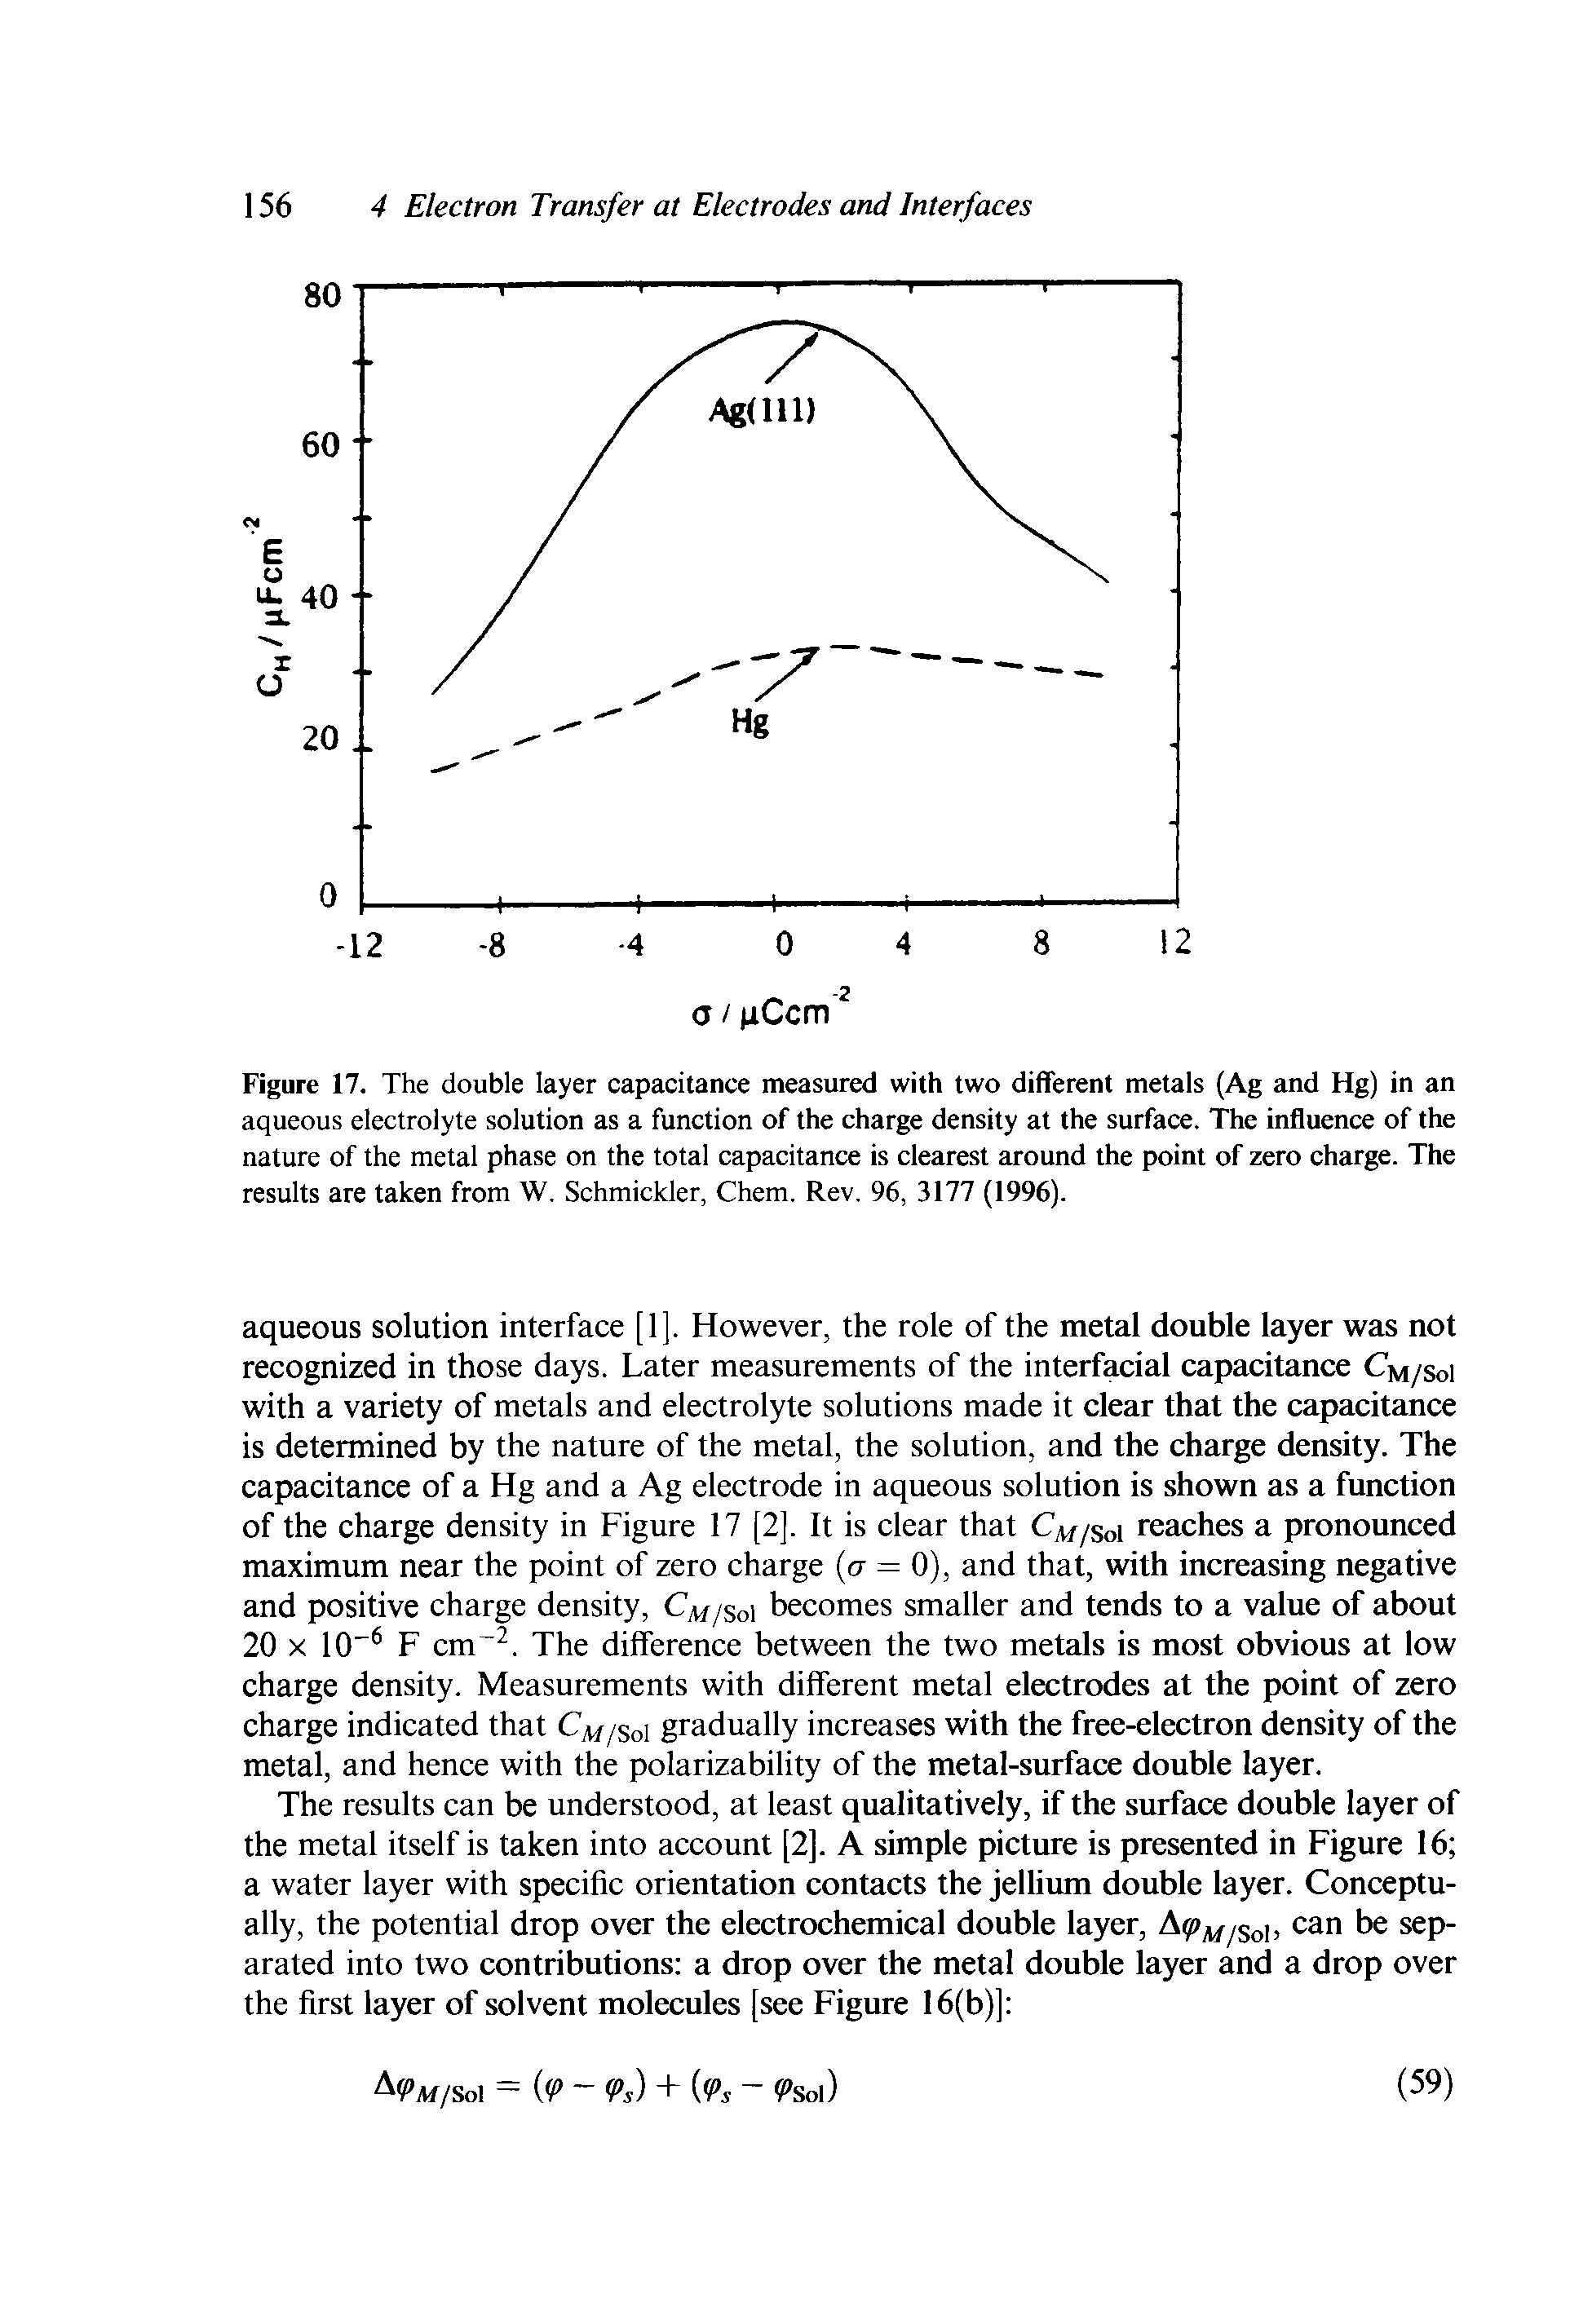 Figure 17. The double layer capacitance measured with two different metals (Ag and Hg) in an aqueous electrolyte solution as a function of the charge density at the surface. The influence of the nature of the metal phase on the total capacitance is clearest around the point of zero charge. The results are taken from W. Schmickler, Chem. Rev. 96, 3177 (1996).